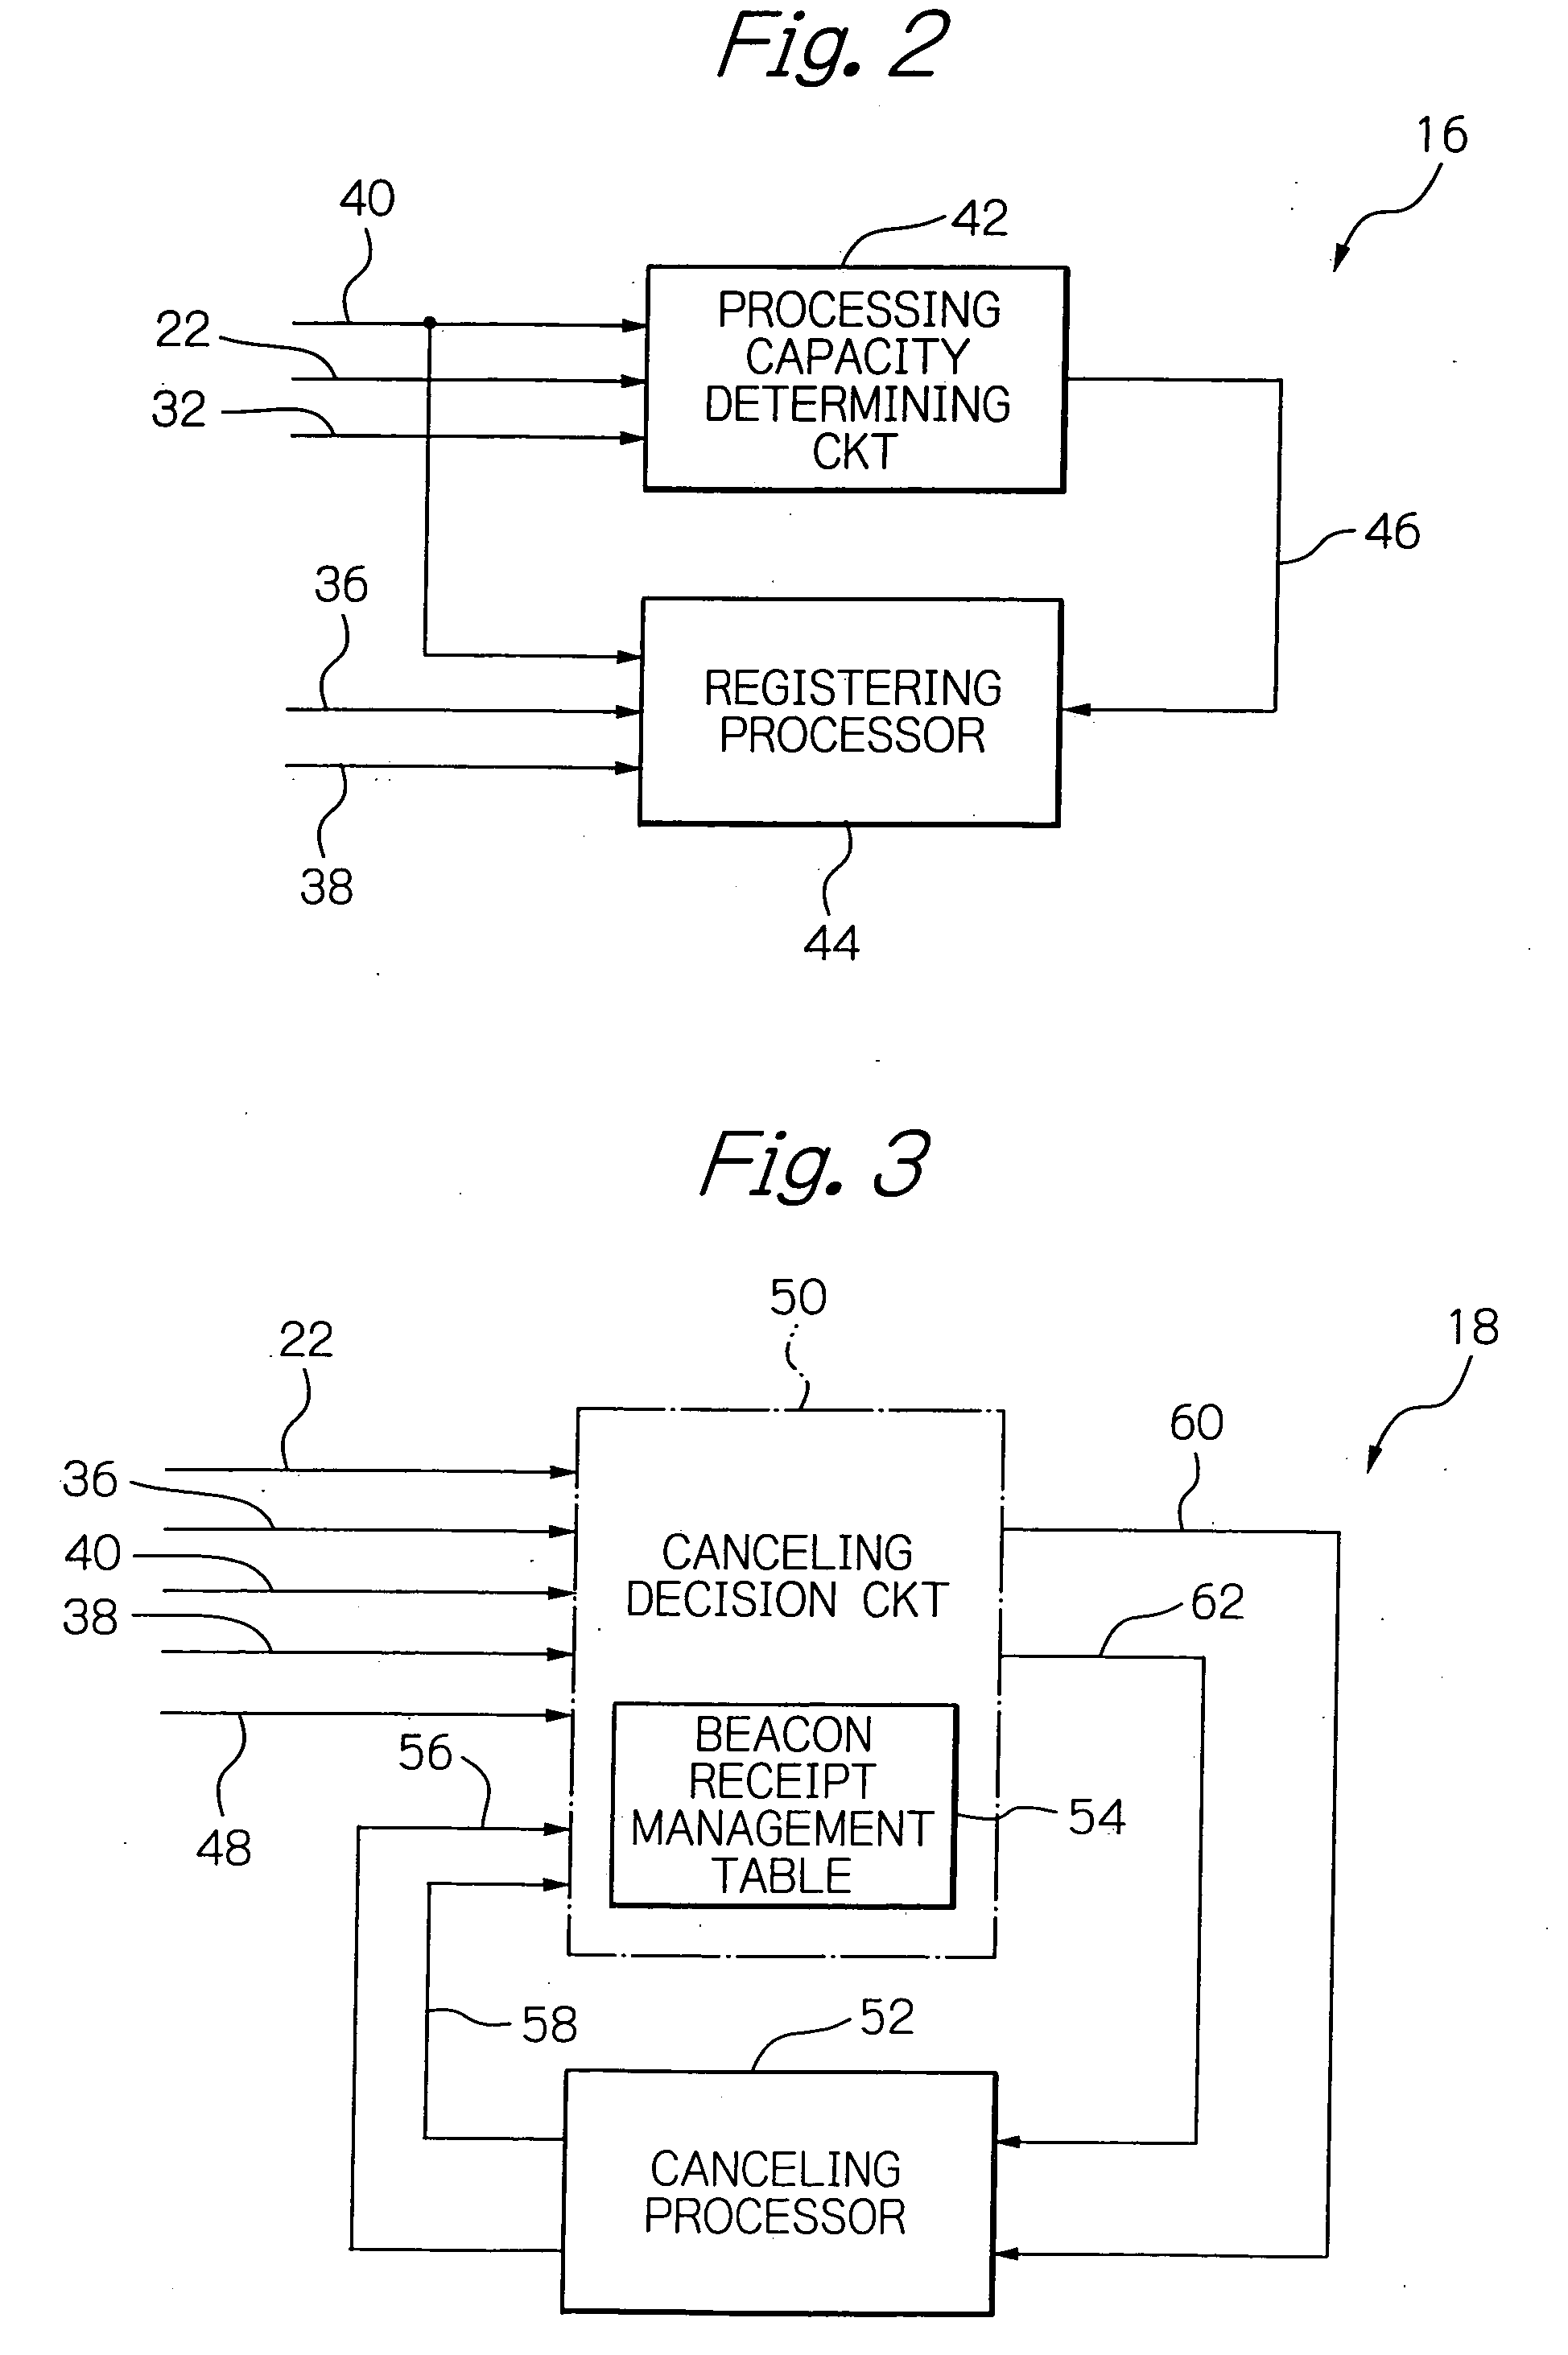 Radio apparatus joining an IBSS or ad hoc network